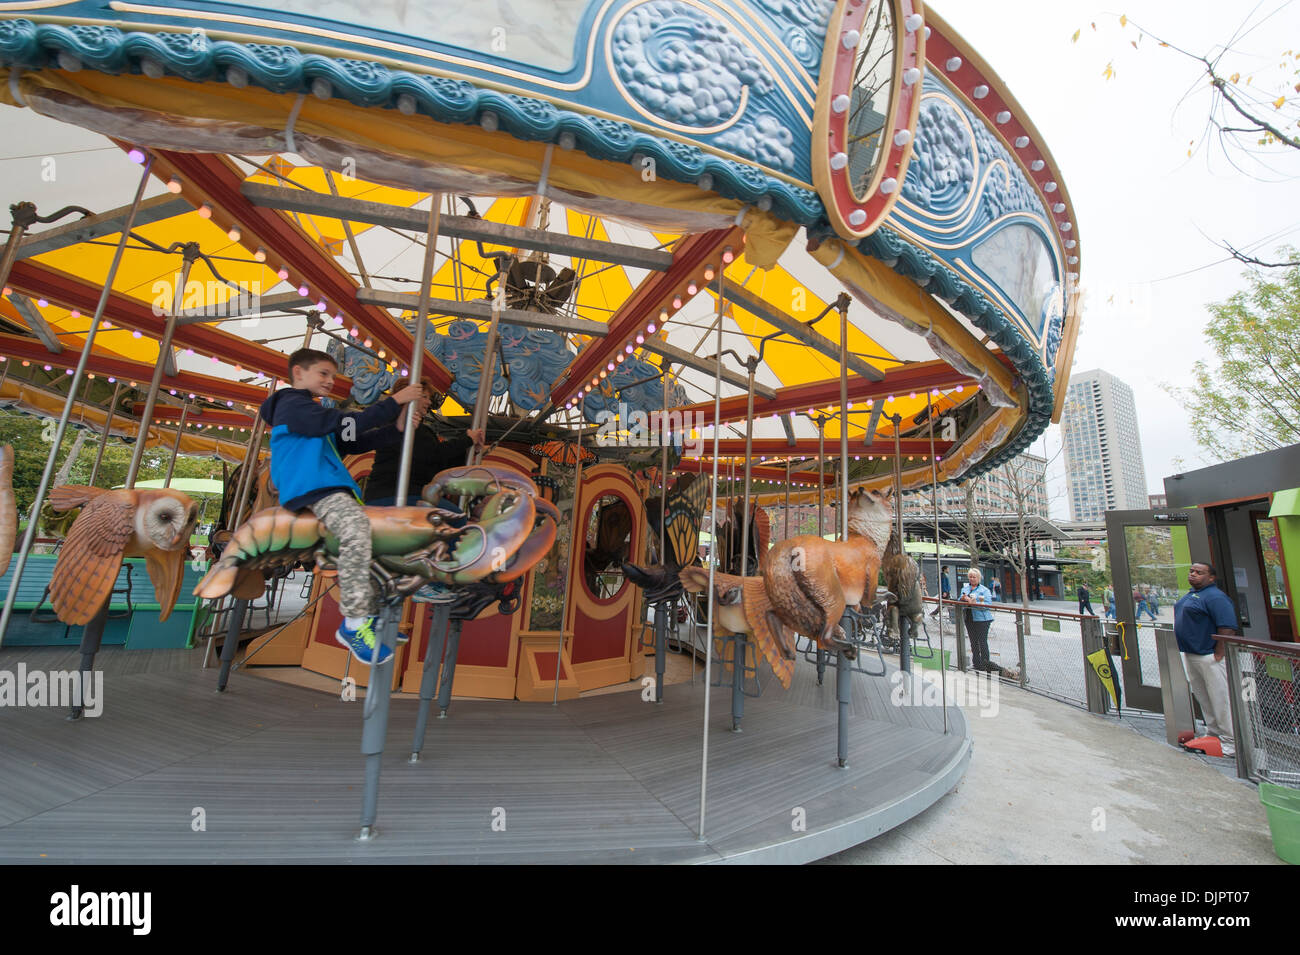 Le Greenway Carousel ouvert le Boston's Rose Kennedy Greenway le 31 août, 2013. Banque D'Images